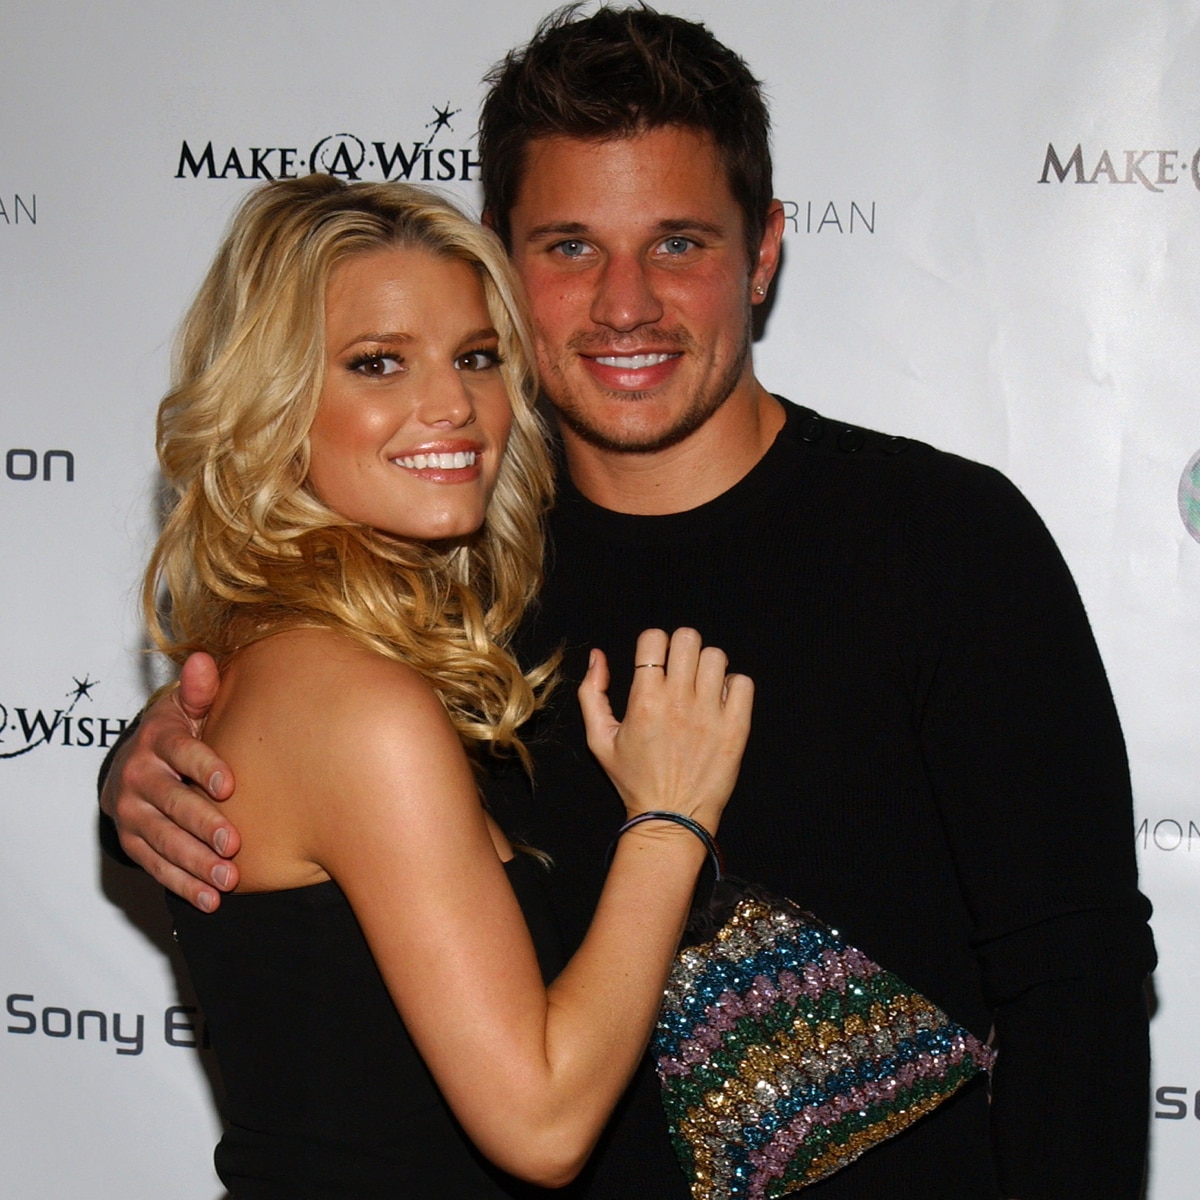 What Jessica Simpson and Nick Lachey Were Like as Newlyweds